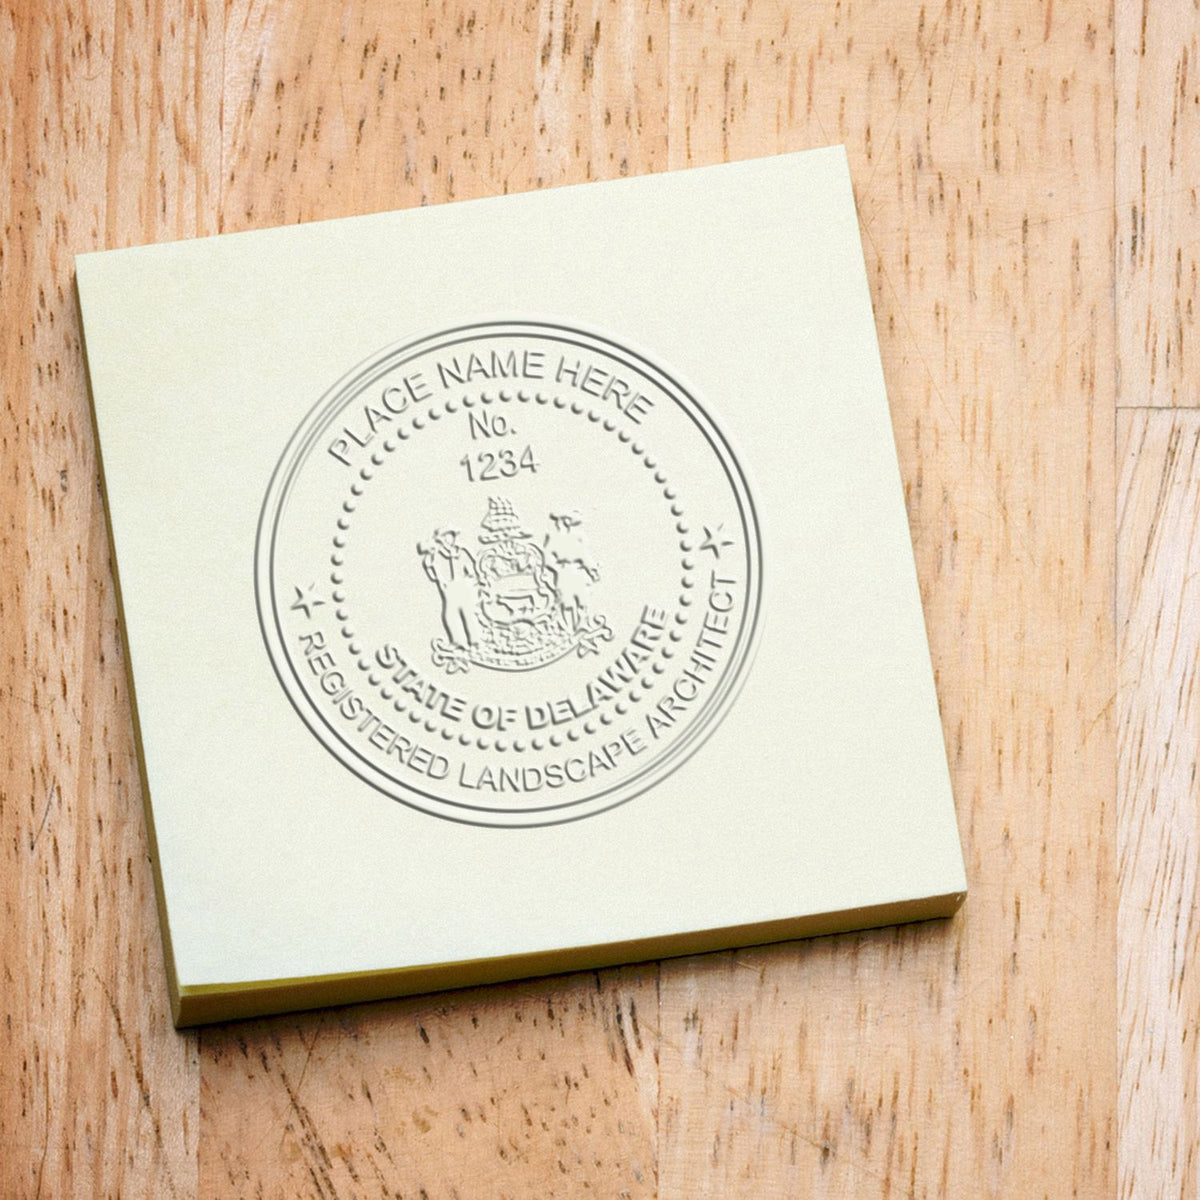 Another Example of a stamped impression of the Hybrid Delaware Landscape Architect Seal on a office form